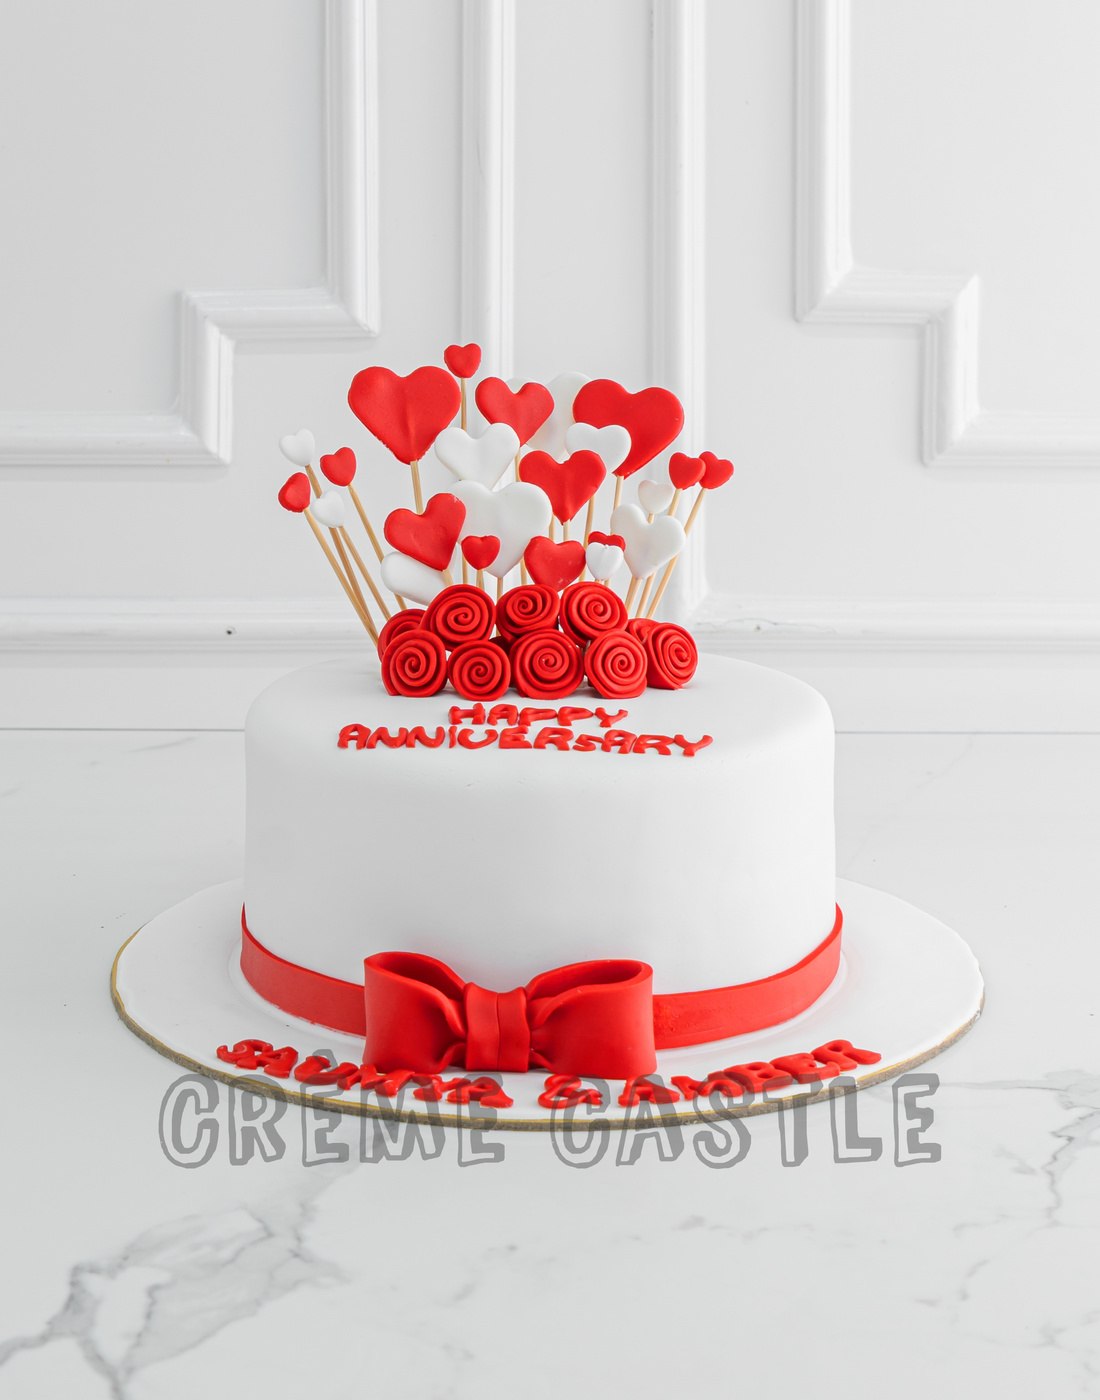 Hearts and Roses Cake